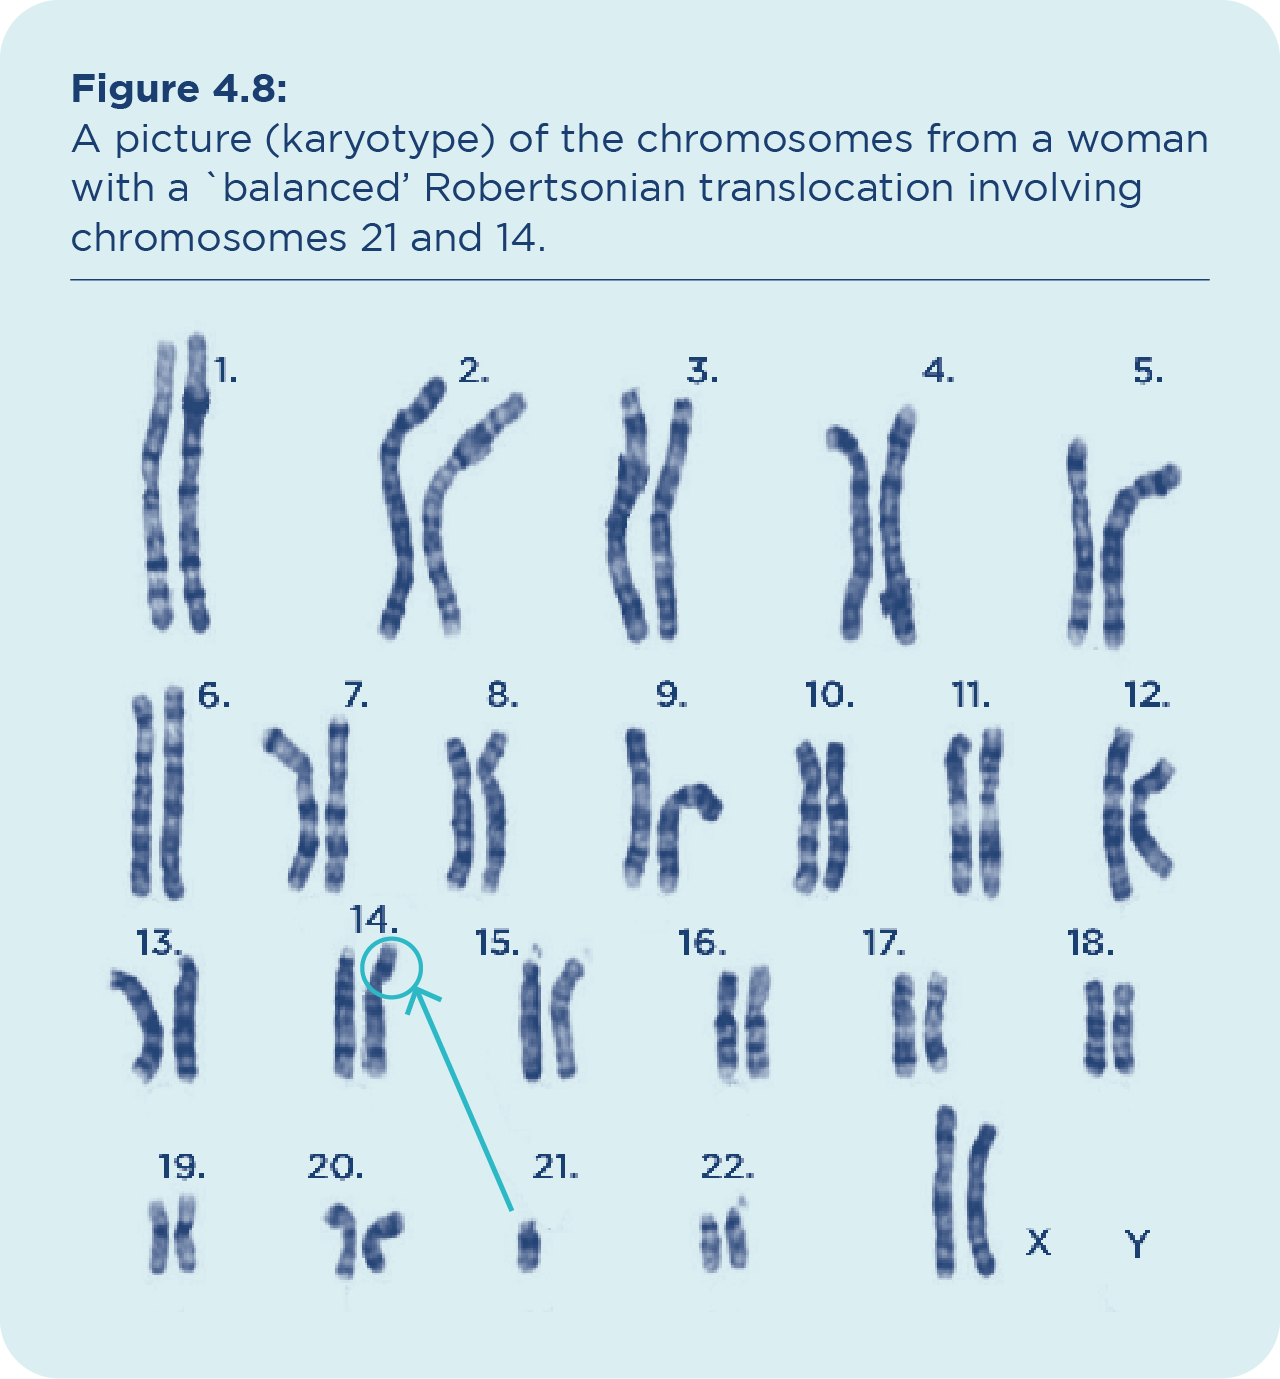 What is a karyotype? Why is it important to know a person's karyotype  before determining the cause of any chromosome abnormalities? - Quora